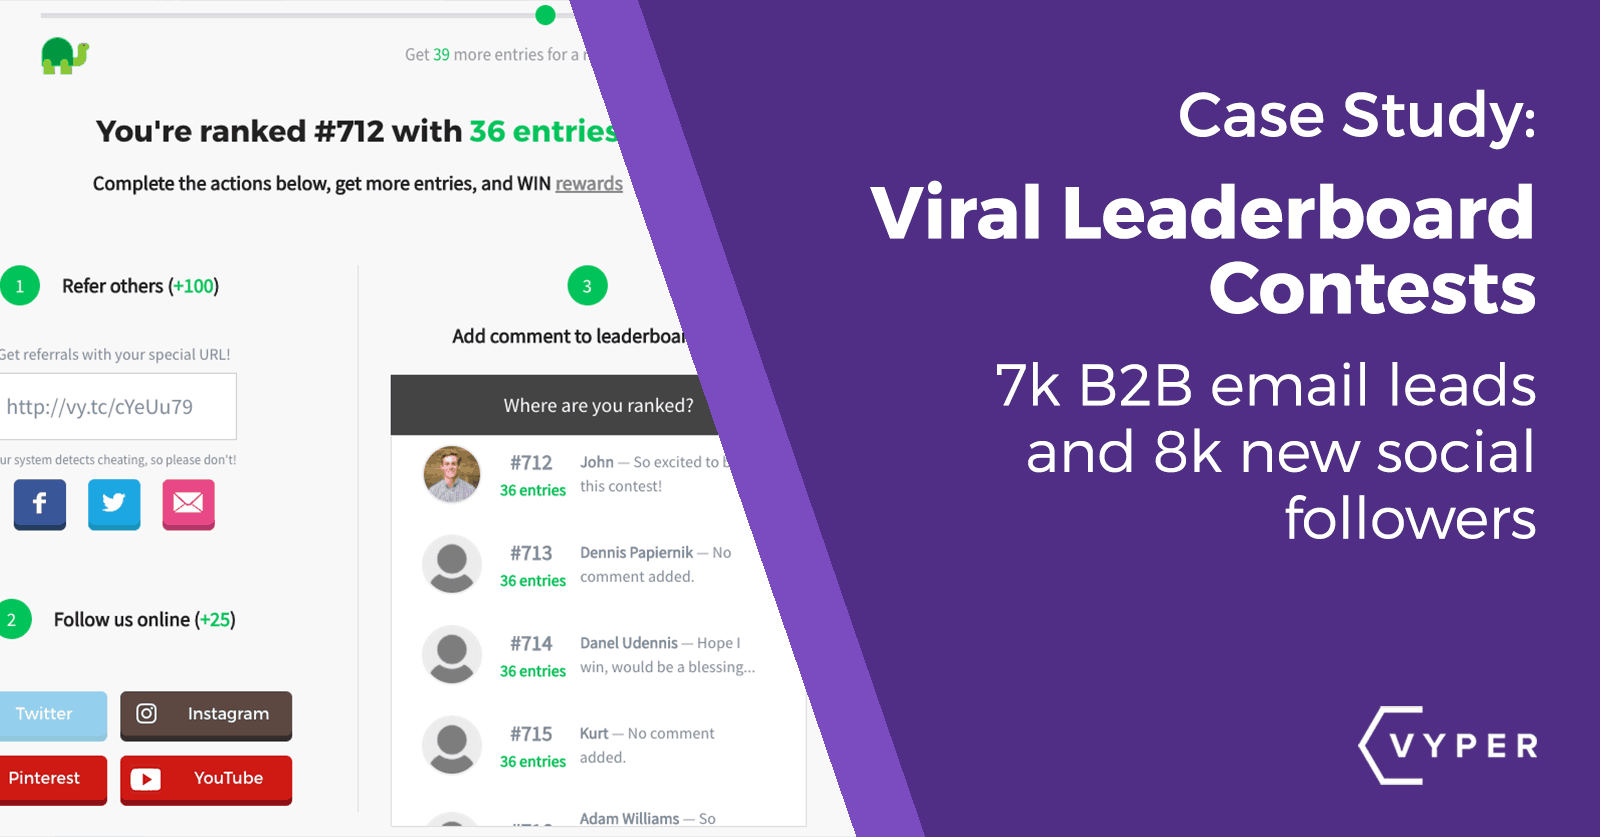 Case Study: How a Viral Contest Leaderboard Generated 7k B2B Leads & 8k Social Followers